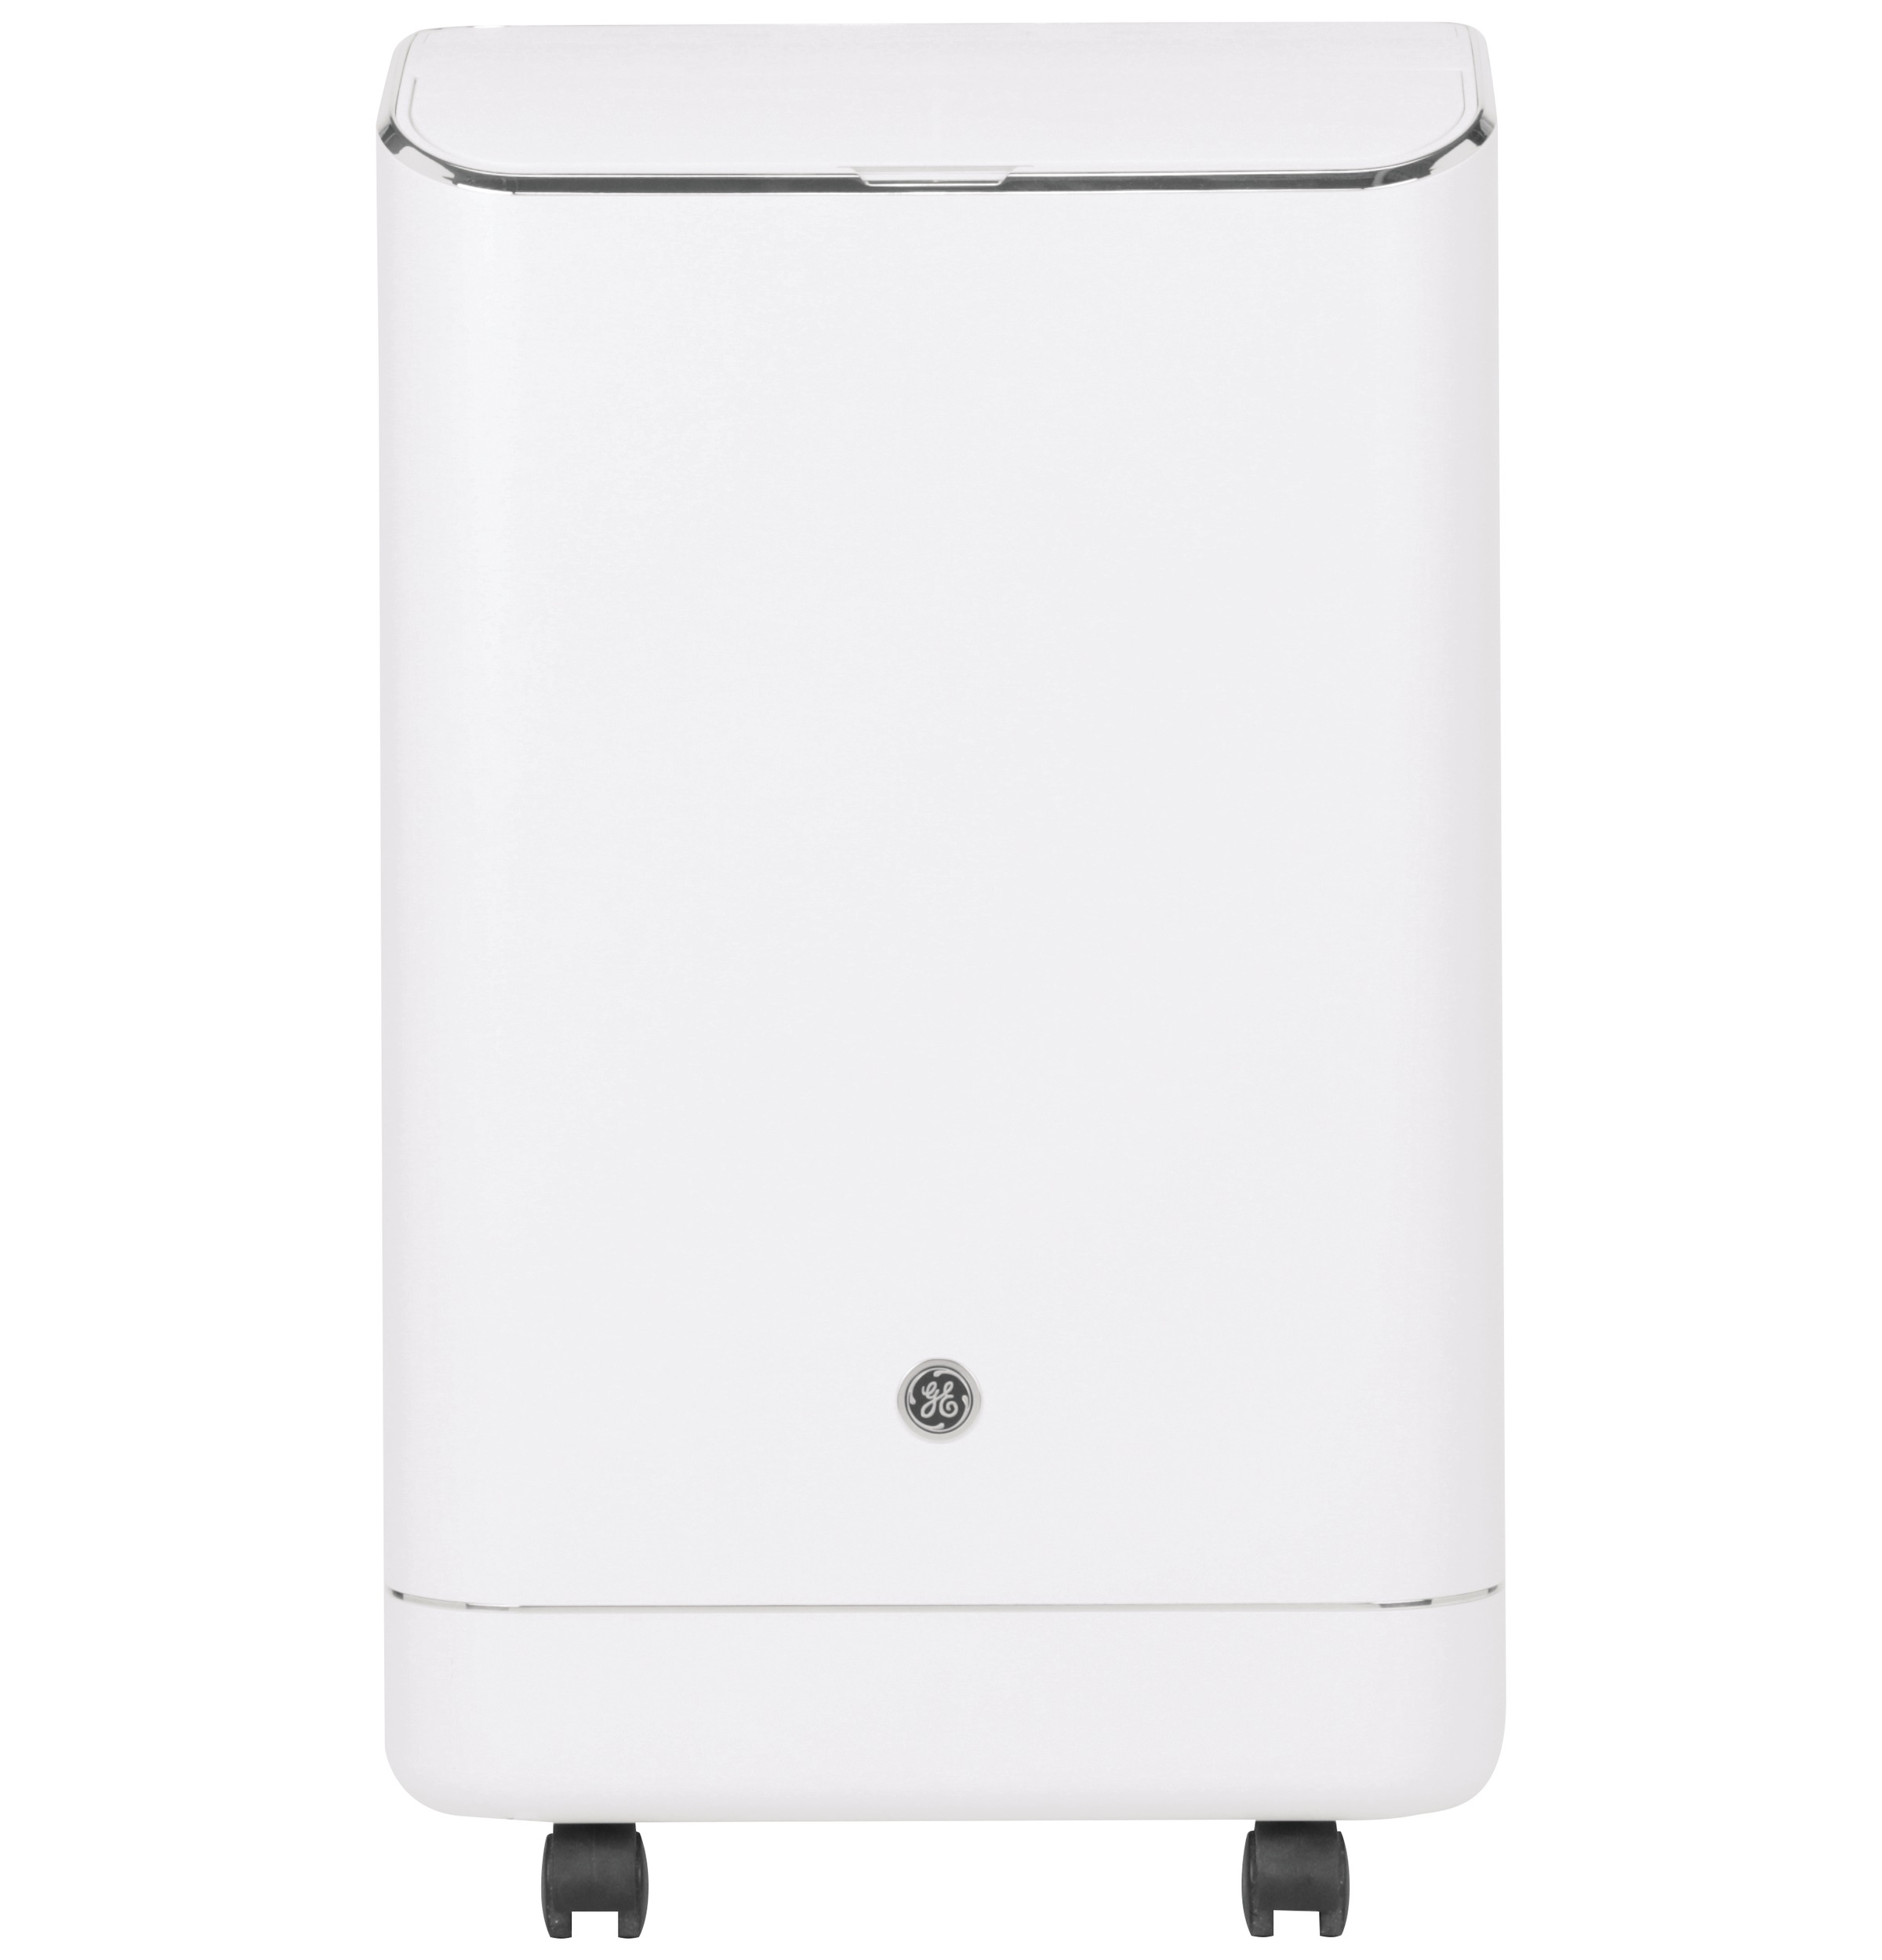 GE® Portable Air Conditioner with Dehumidifier for Medium Rooms up to 450 sq. ft., 12,000 BTU (8,200 BTU SACC)